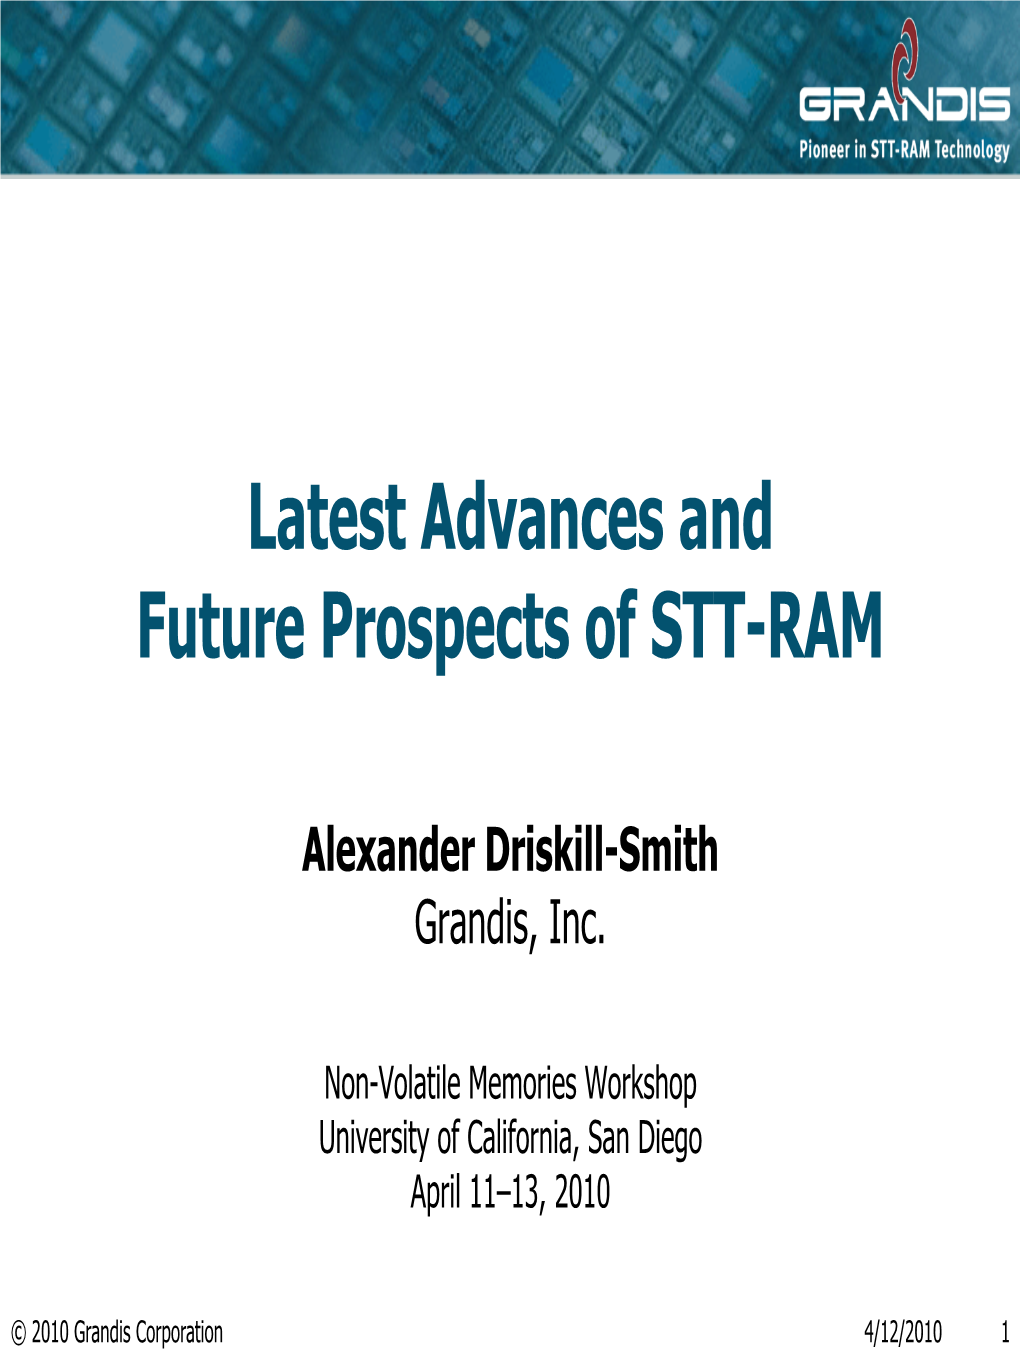 Latest Advances and Future Prospects of STT-RAM